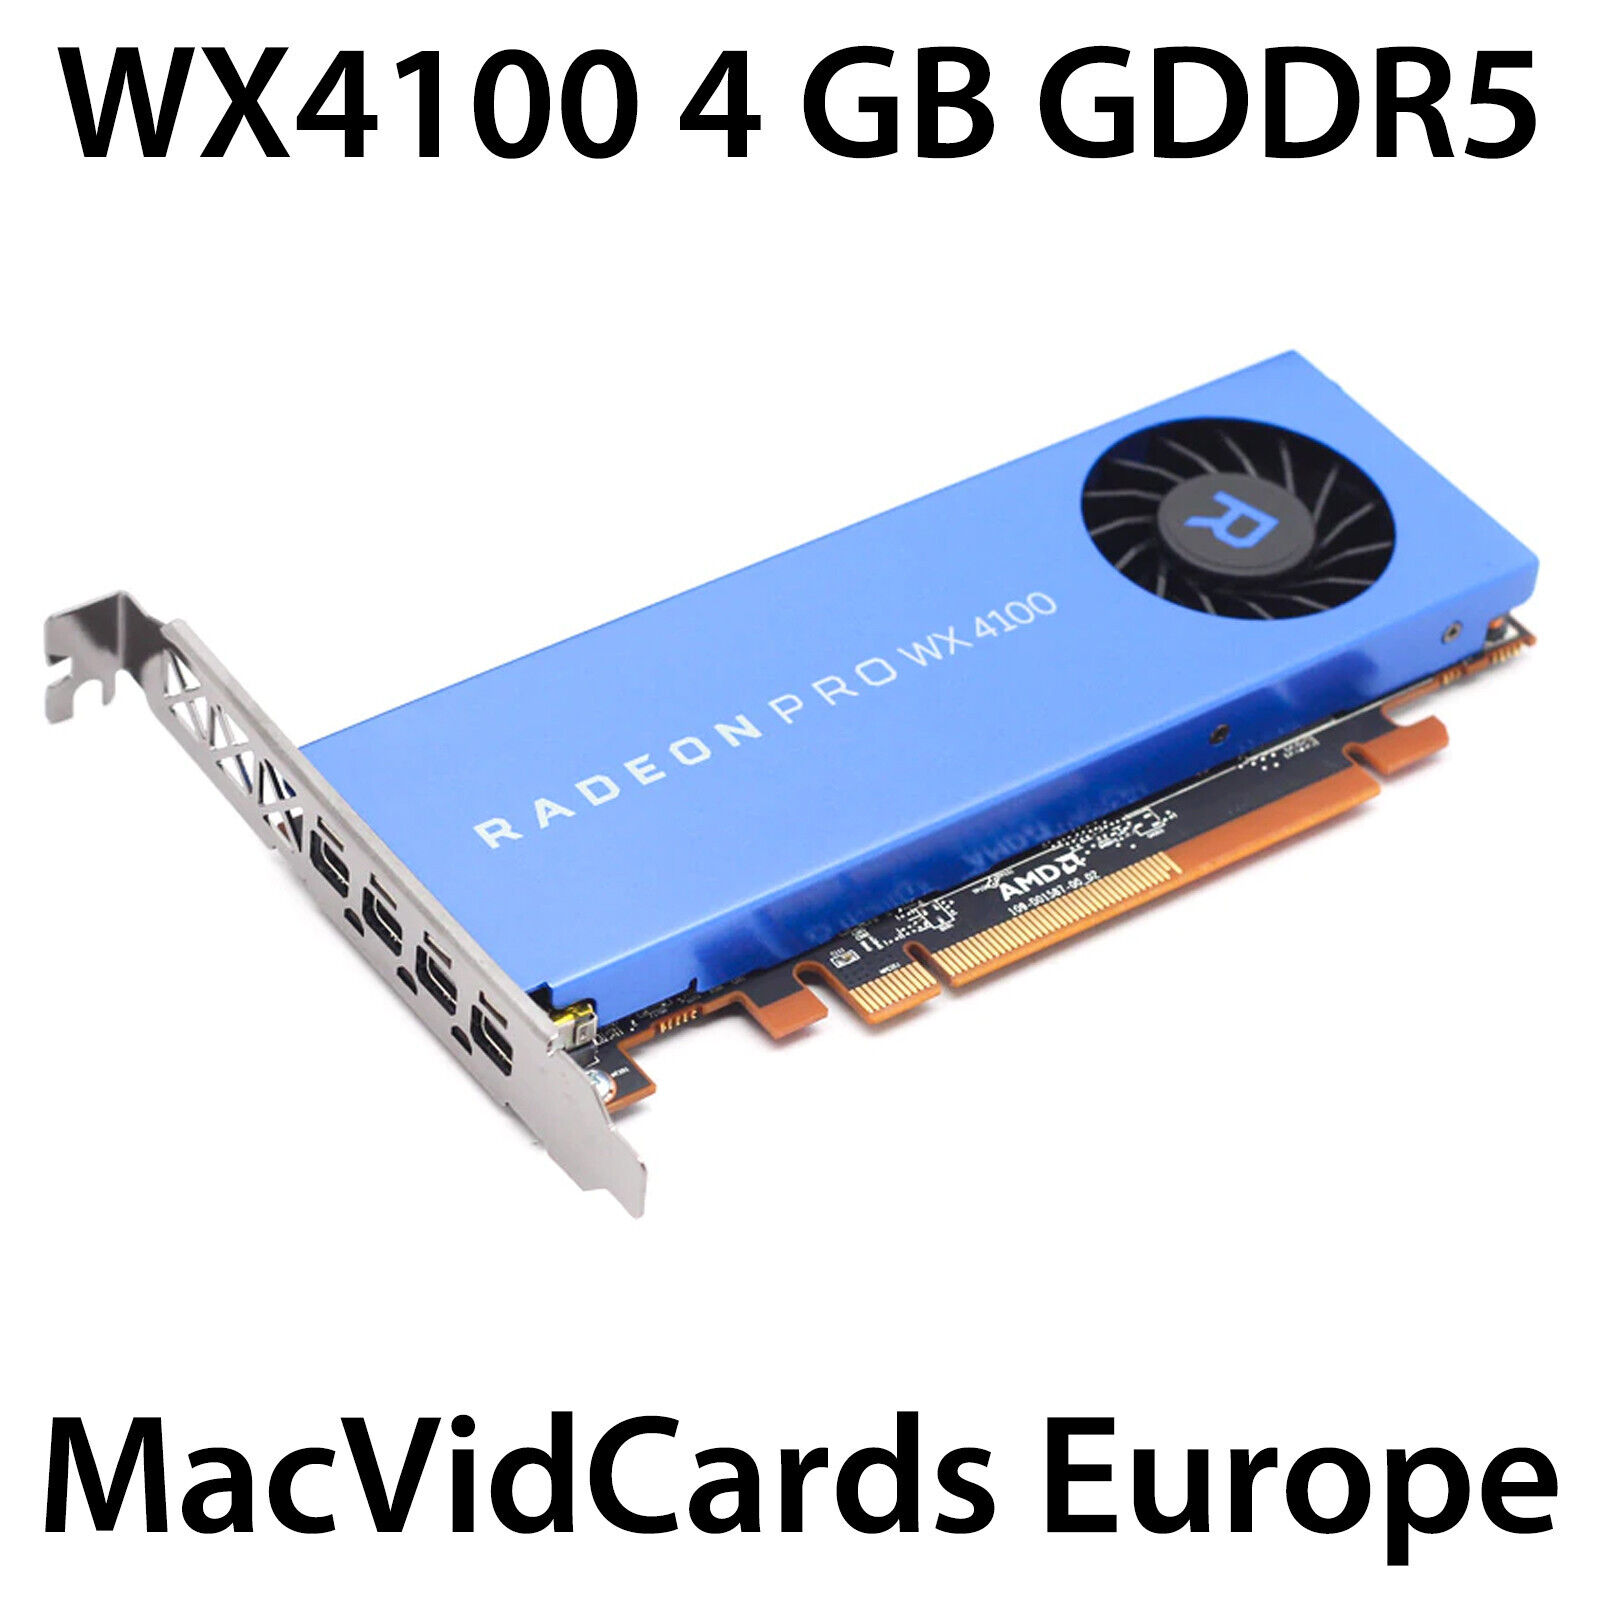 MacVidCards AMD Radeon PRO WX4100 4 GB Video Card for Apple Mac Pro BOOT SCREEN